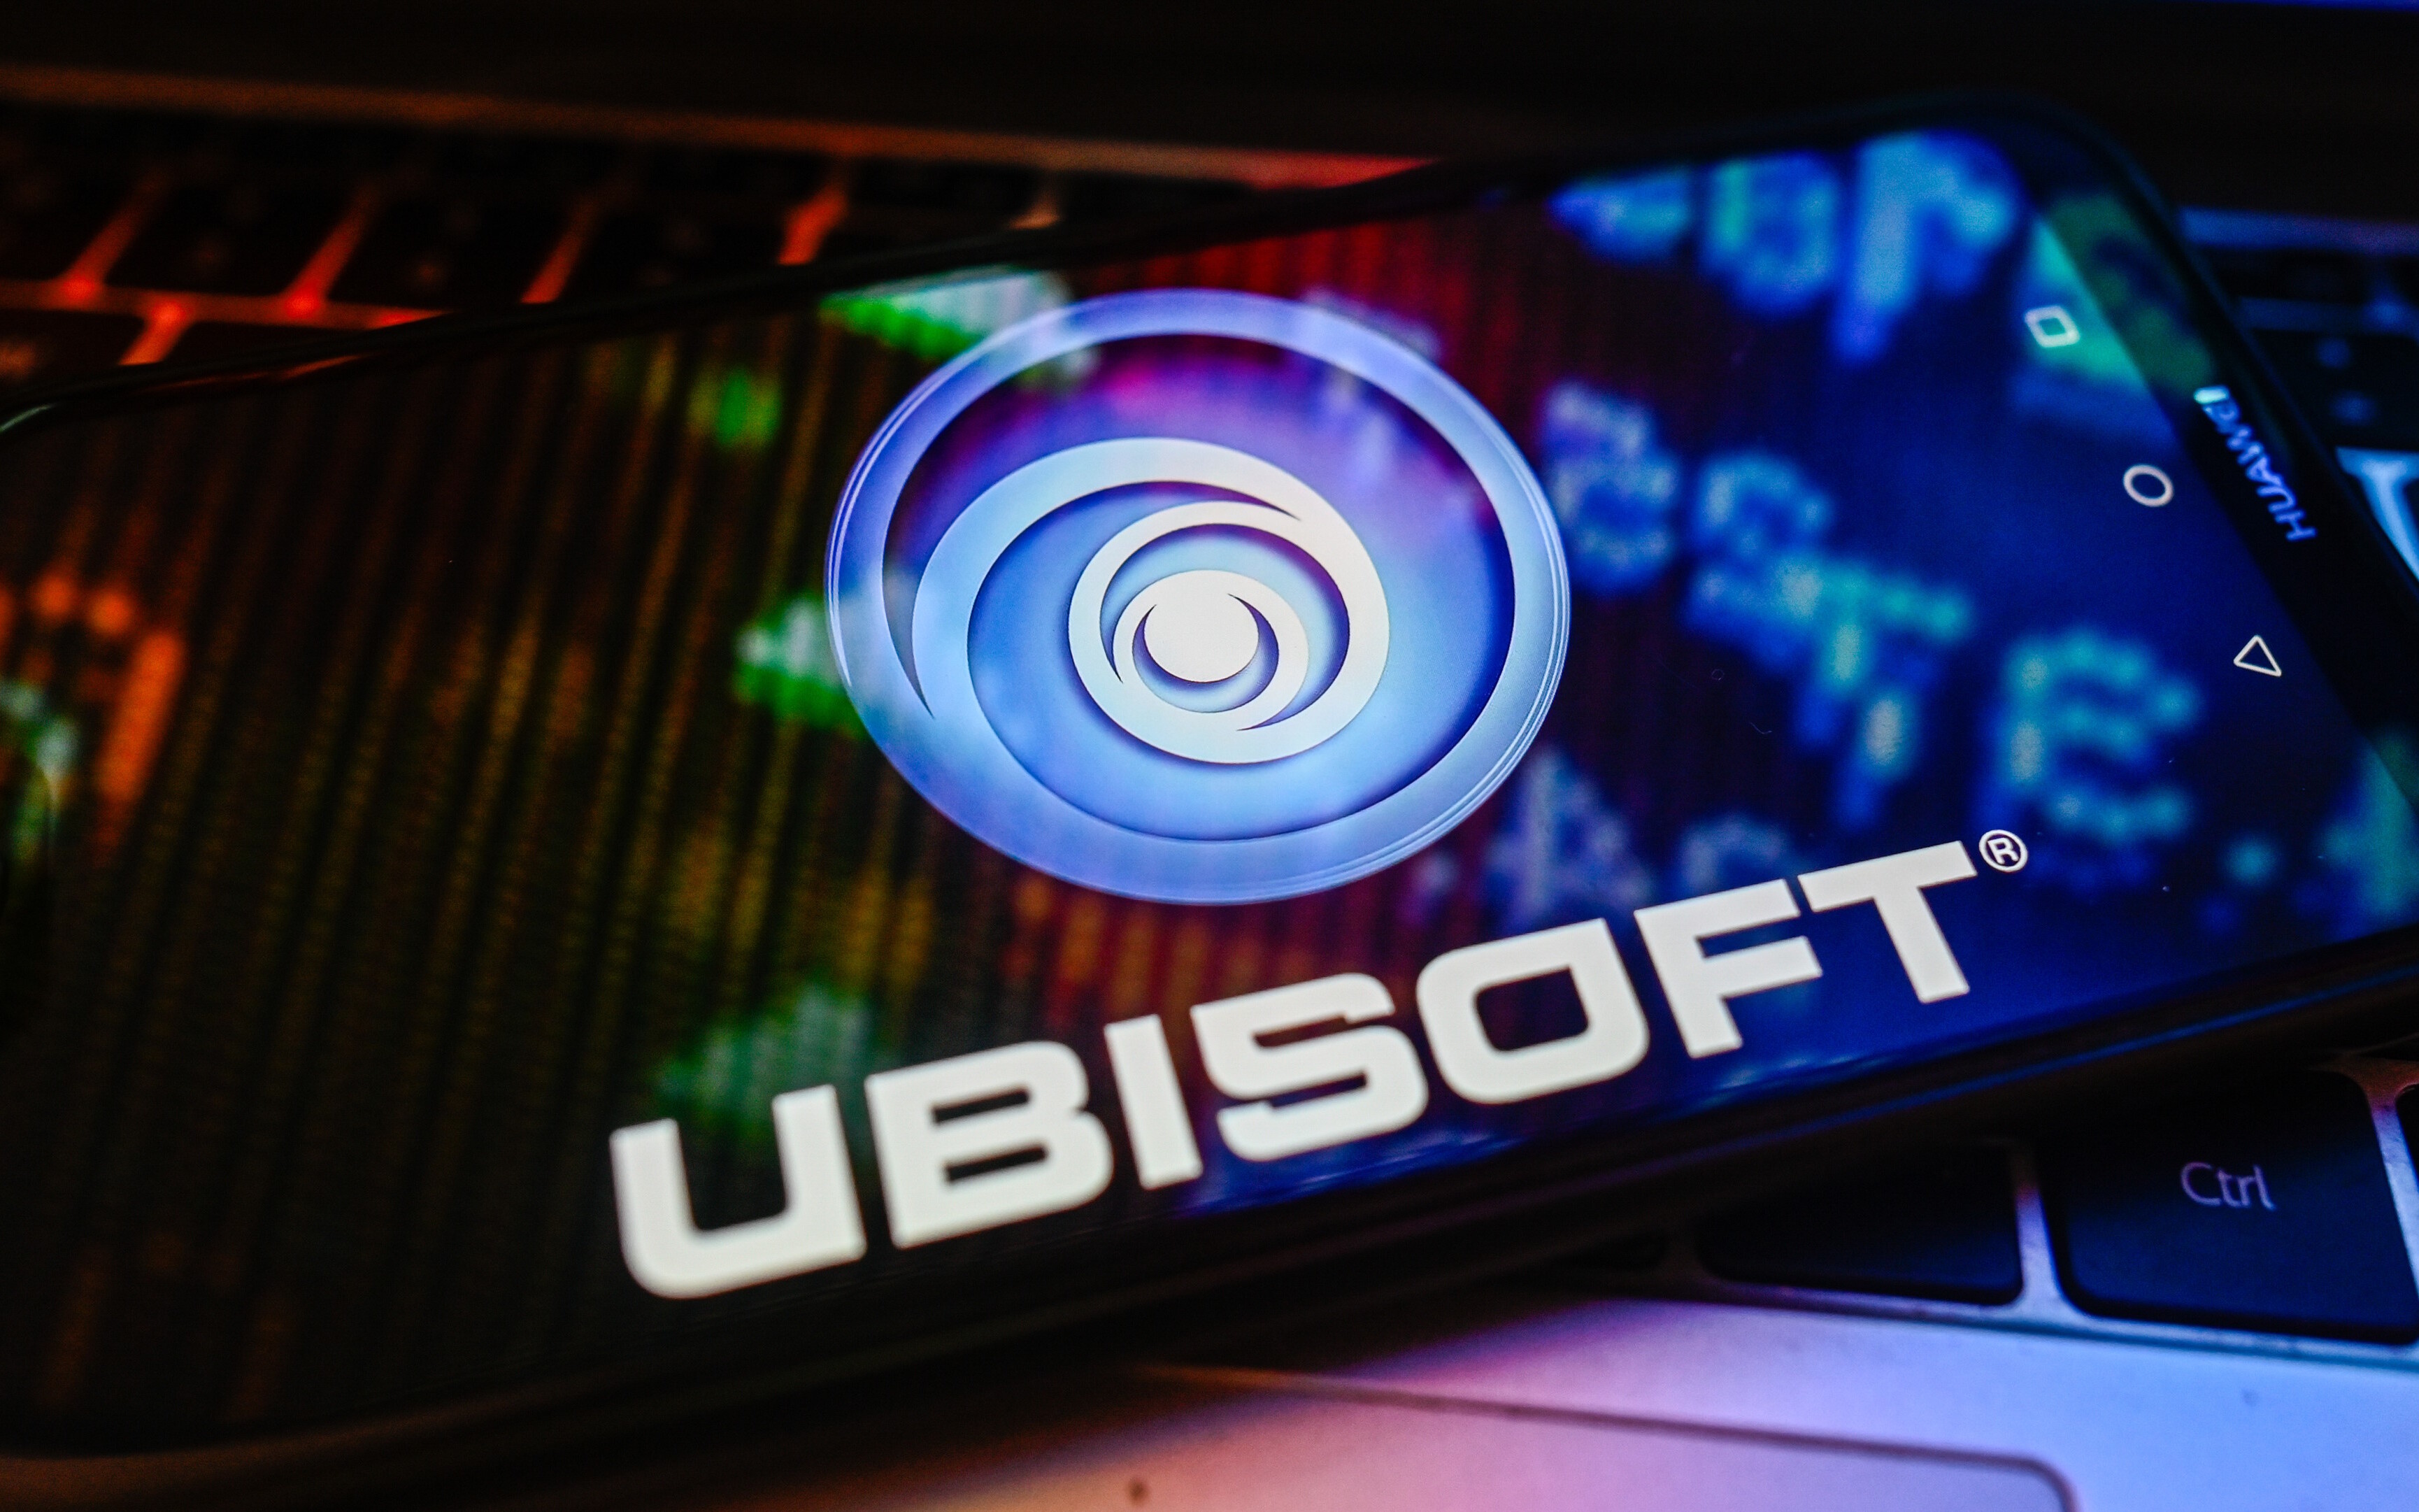 Ubisoft doesn’t learn from mistakes. The company has entered into another collaboration.